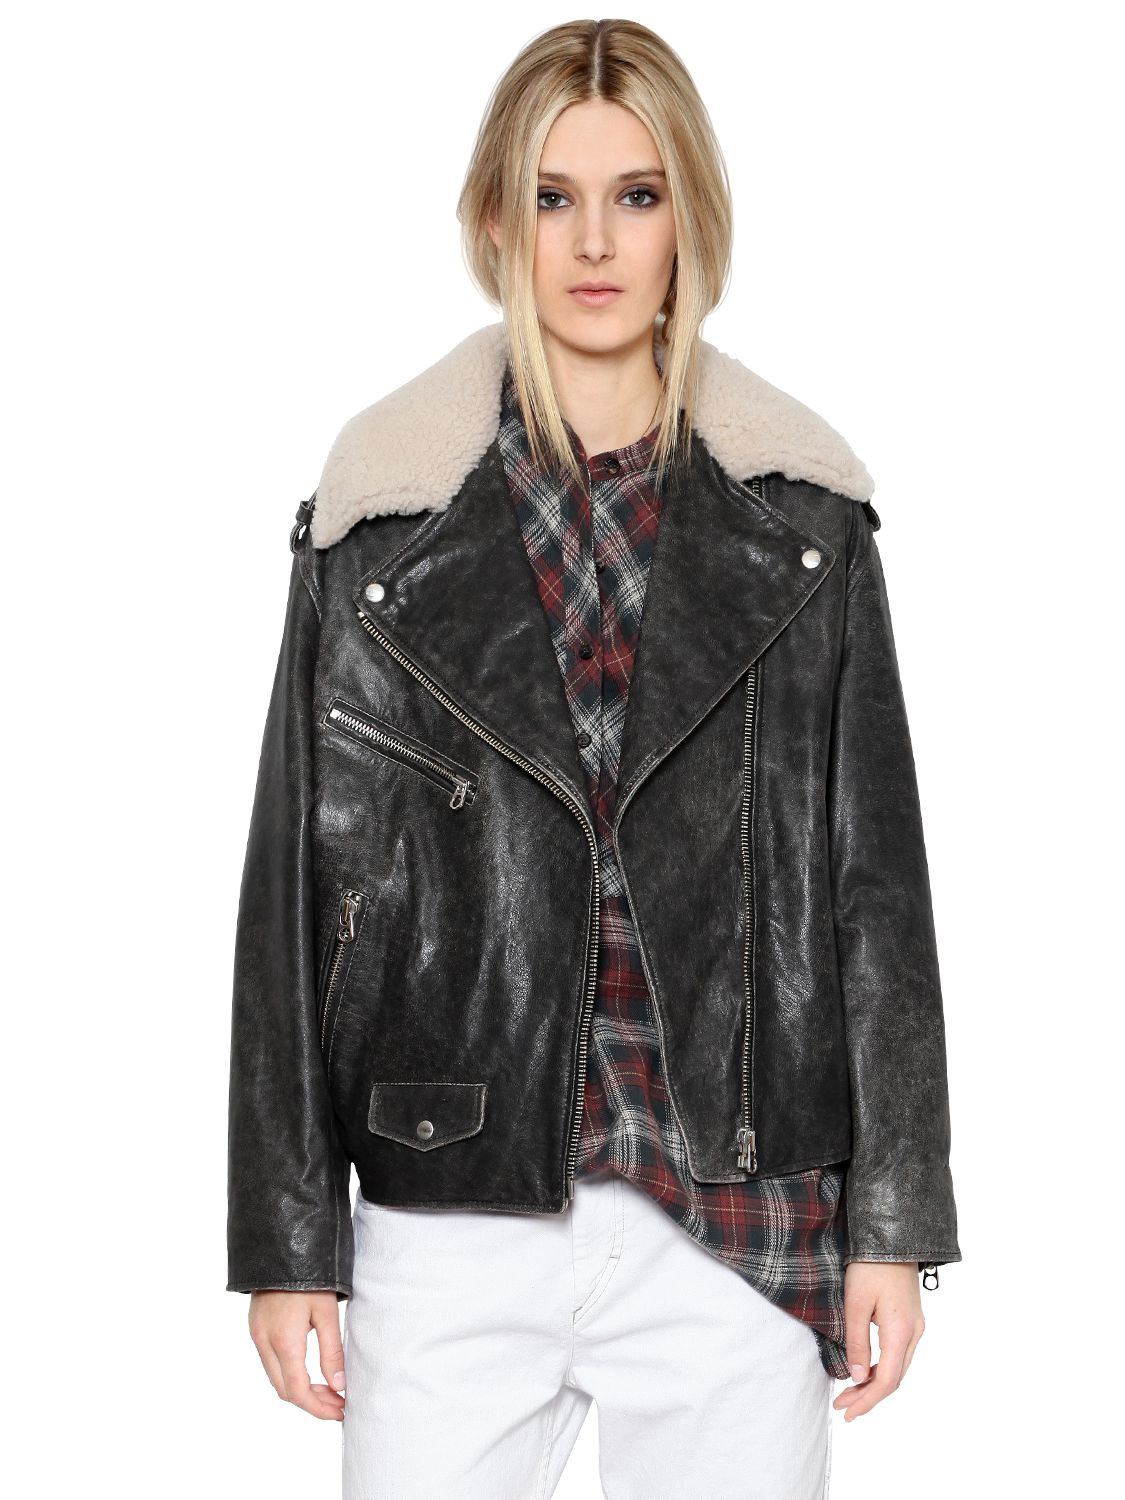 Étoile Isabel Marant Leather Jacket With Shearling Collar in Black - Lyst